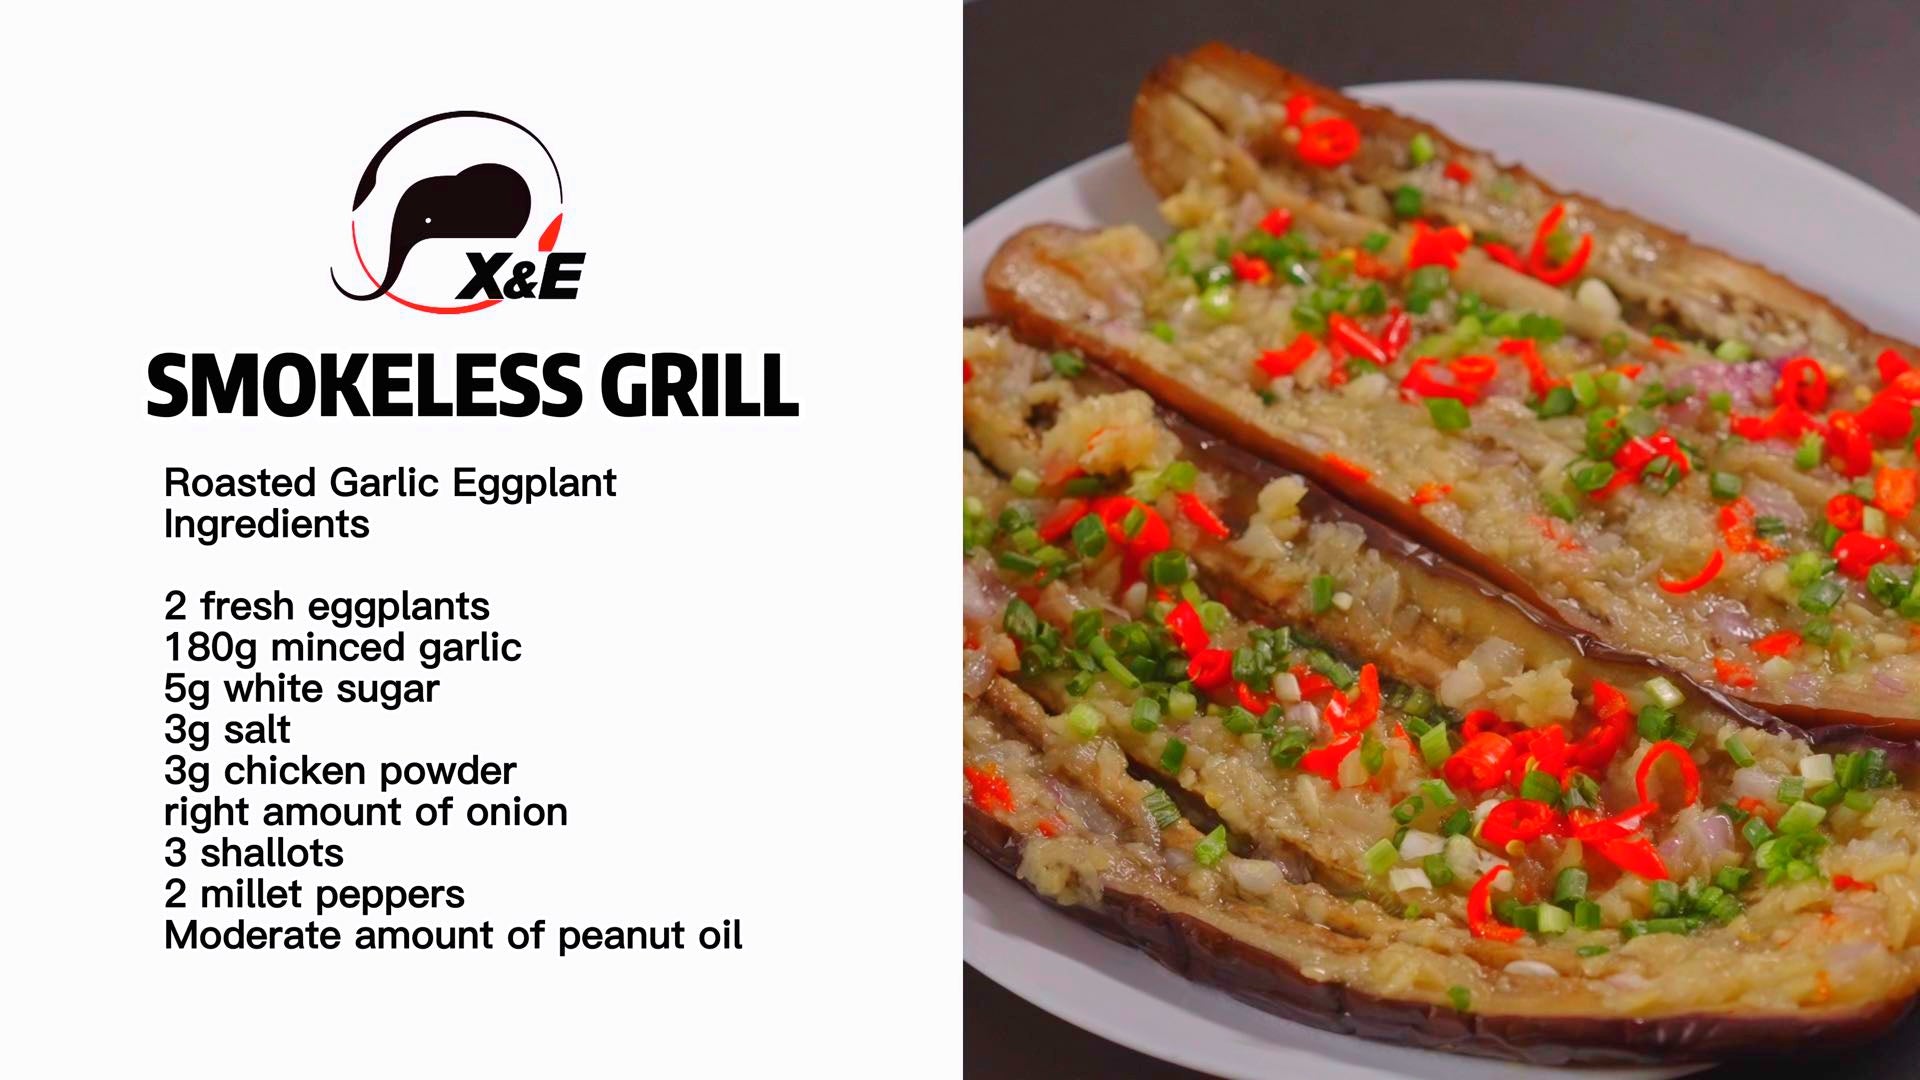 The X&E Smokeless Grill allows you to enjoy the powerful flavors of perfectly grilled eggplant and garlic, all without the need to grill outdoors or deal with smoke.